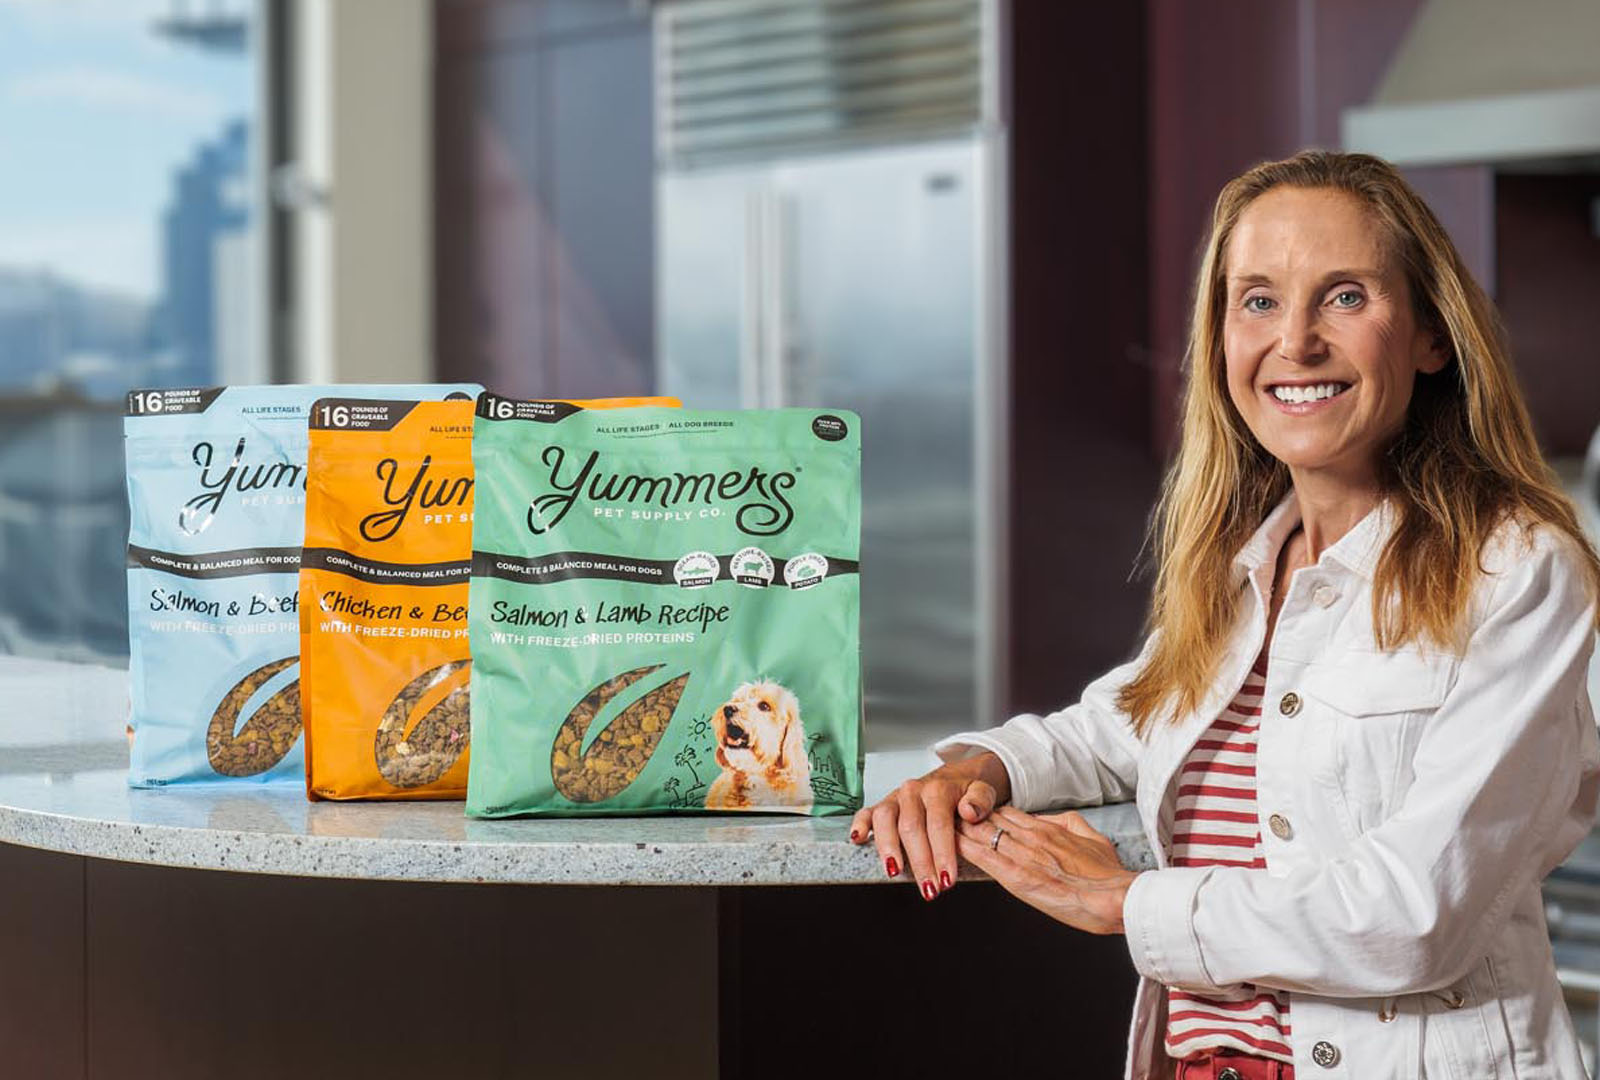 Rebecca Frechette Rudisch, co-founder and CEO of Yummers